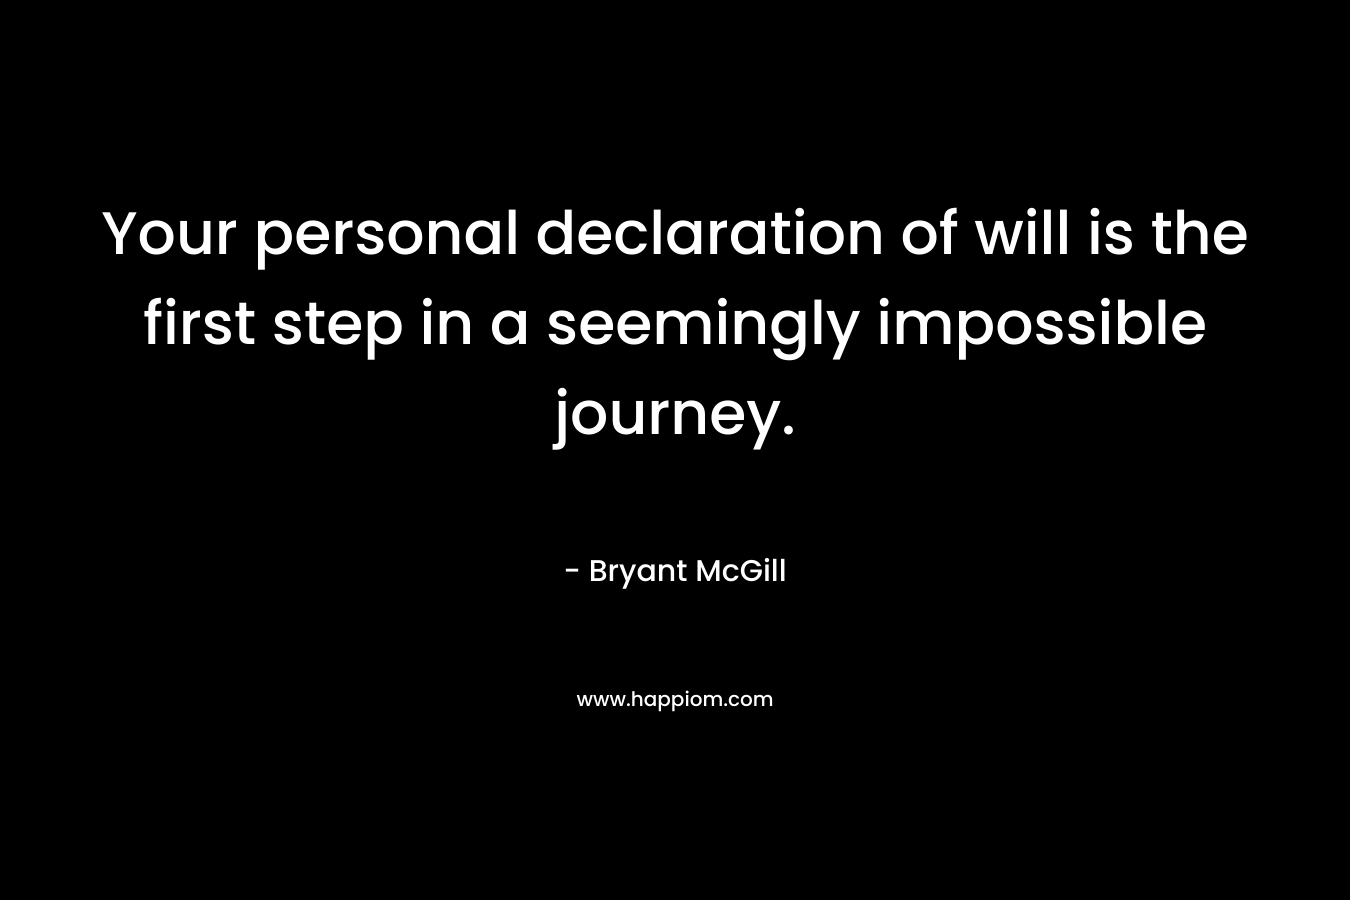 Your personal declaration of will is the first step in a seemingly impossible journey. – Bryant McGill